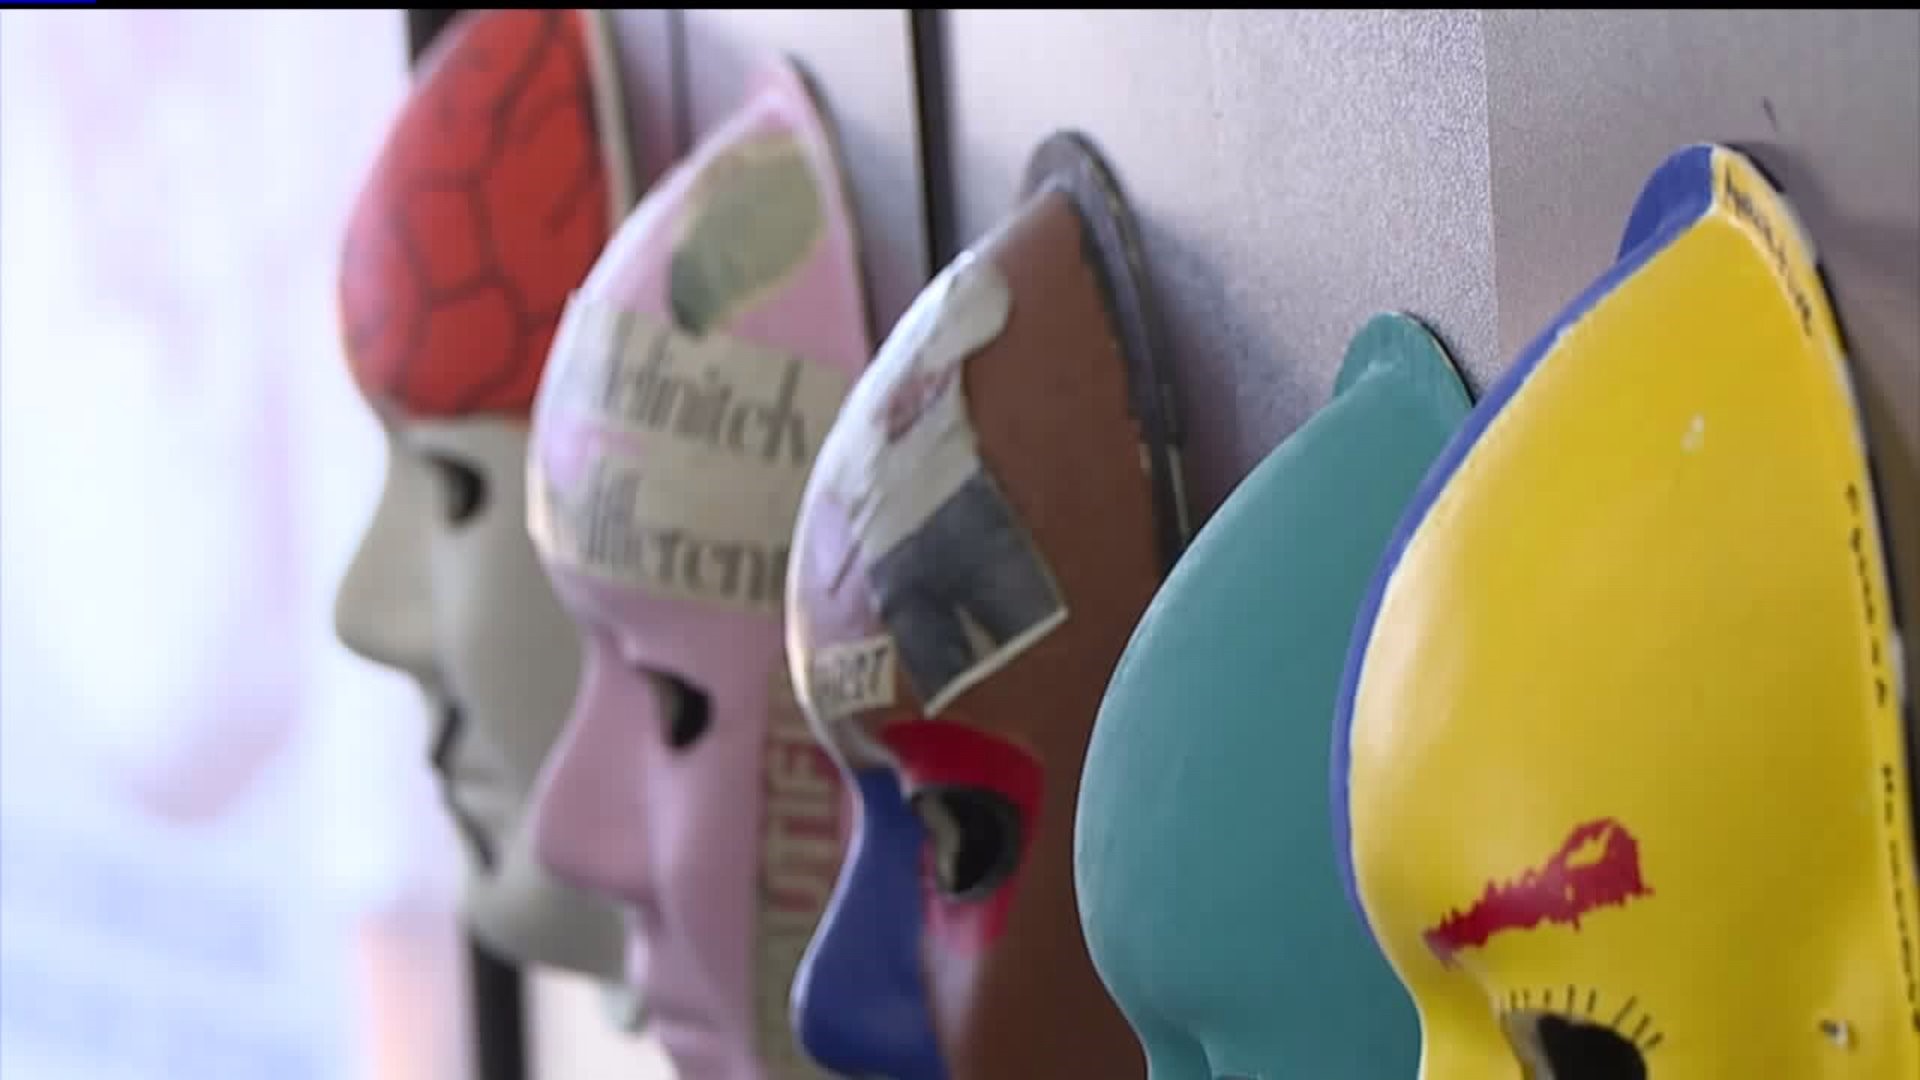 Brain injury survivors use art to give glimpse of what`s inside